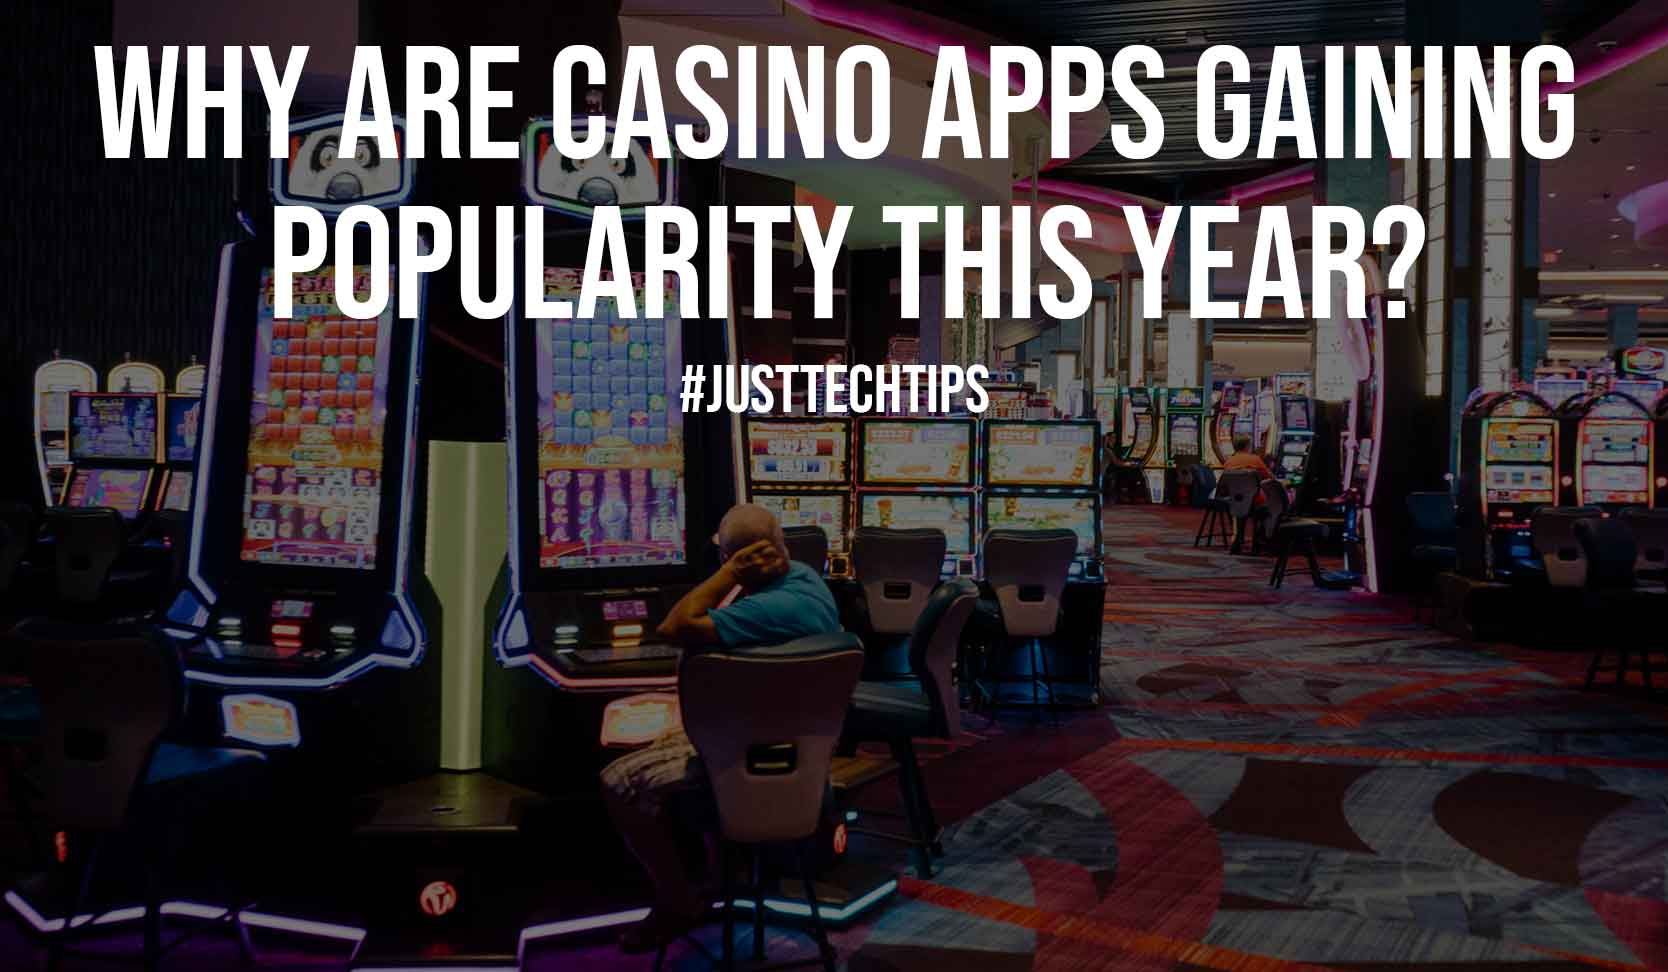 Why are Casino Apps Gaining Popularity this Year